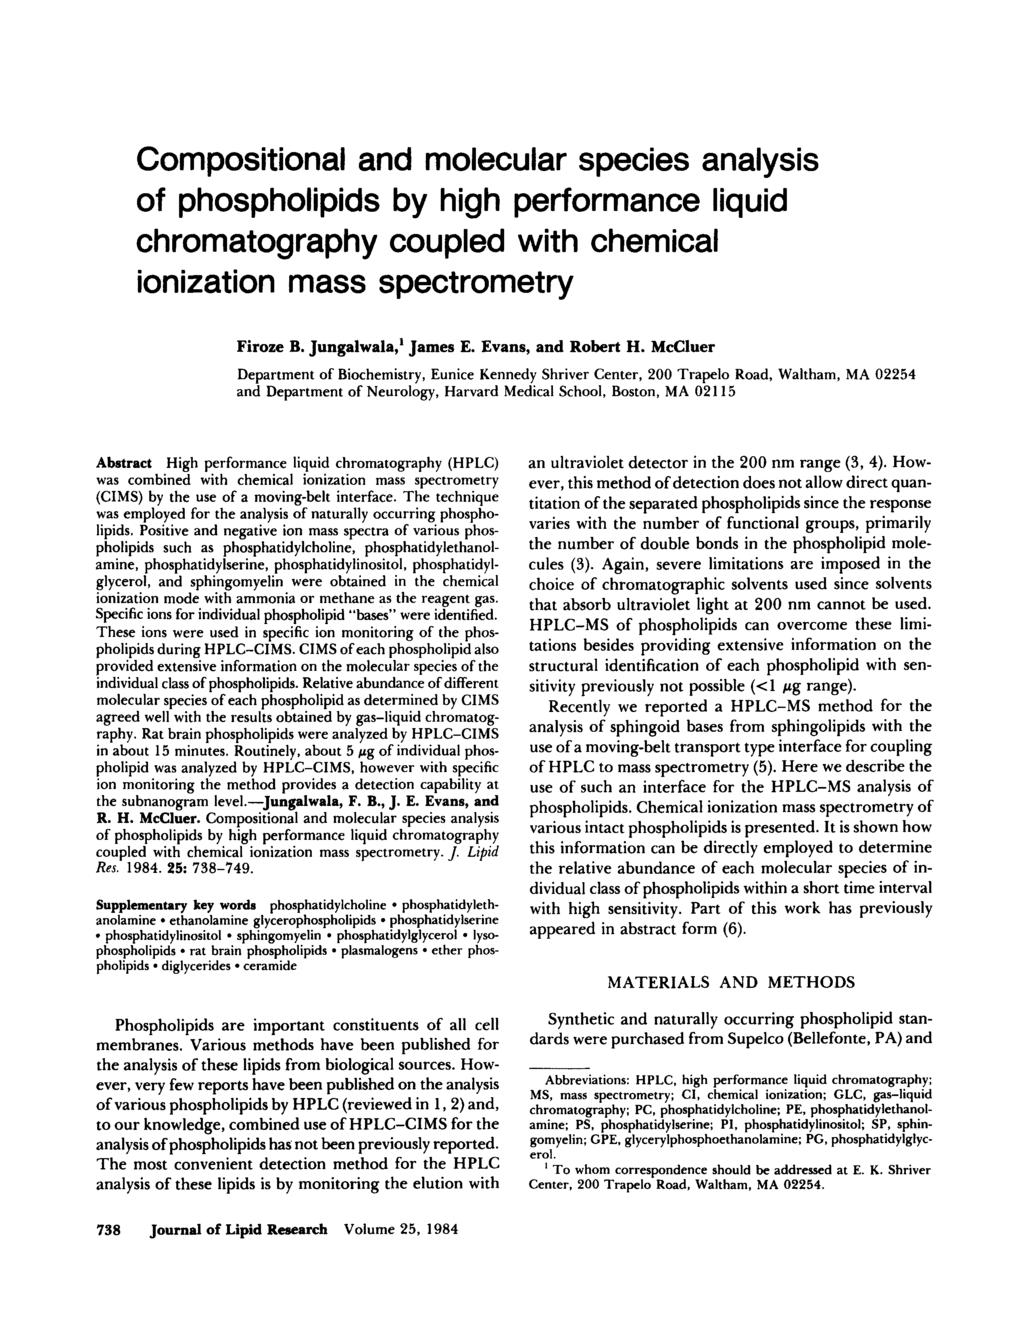 Compositional and molecular species analysis of phospholipids by high performance liquid chromatography coupled with chemical ionization mass spectrometry Firoze B. Jungalwala, James E.